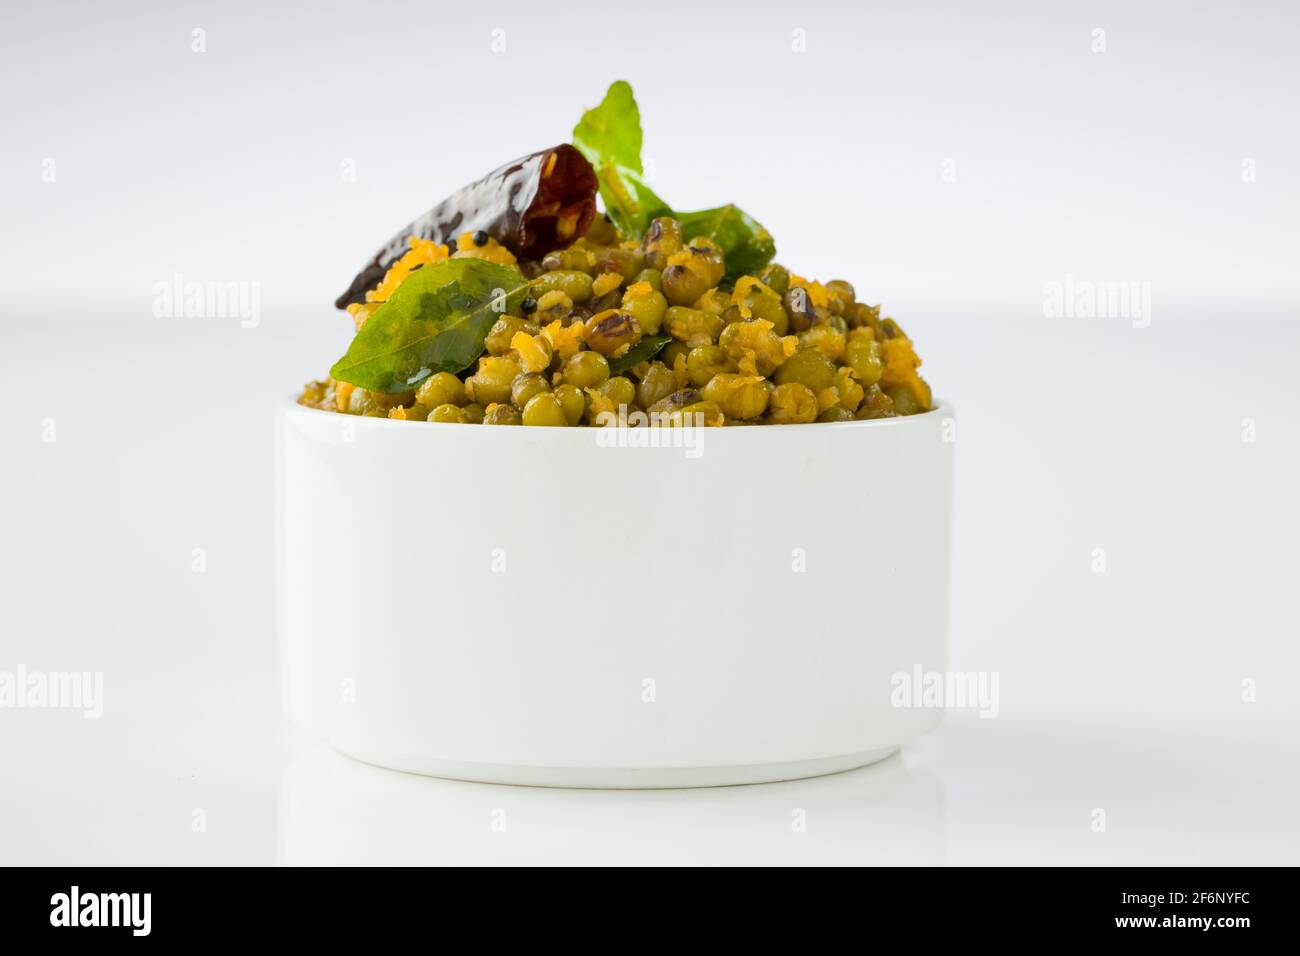 Green gram stir fry or mung bean dry fry,kerala common dish which is very healthy and tasty and it is arranged in a white bowl with white textured bac Stock Photo